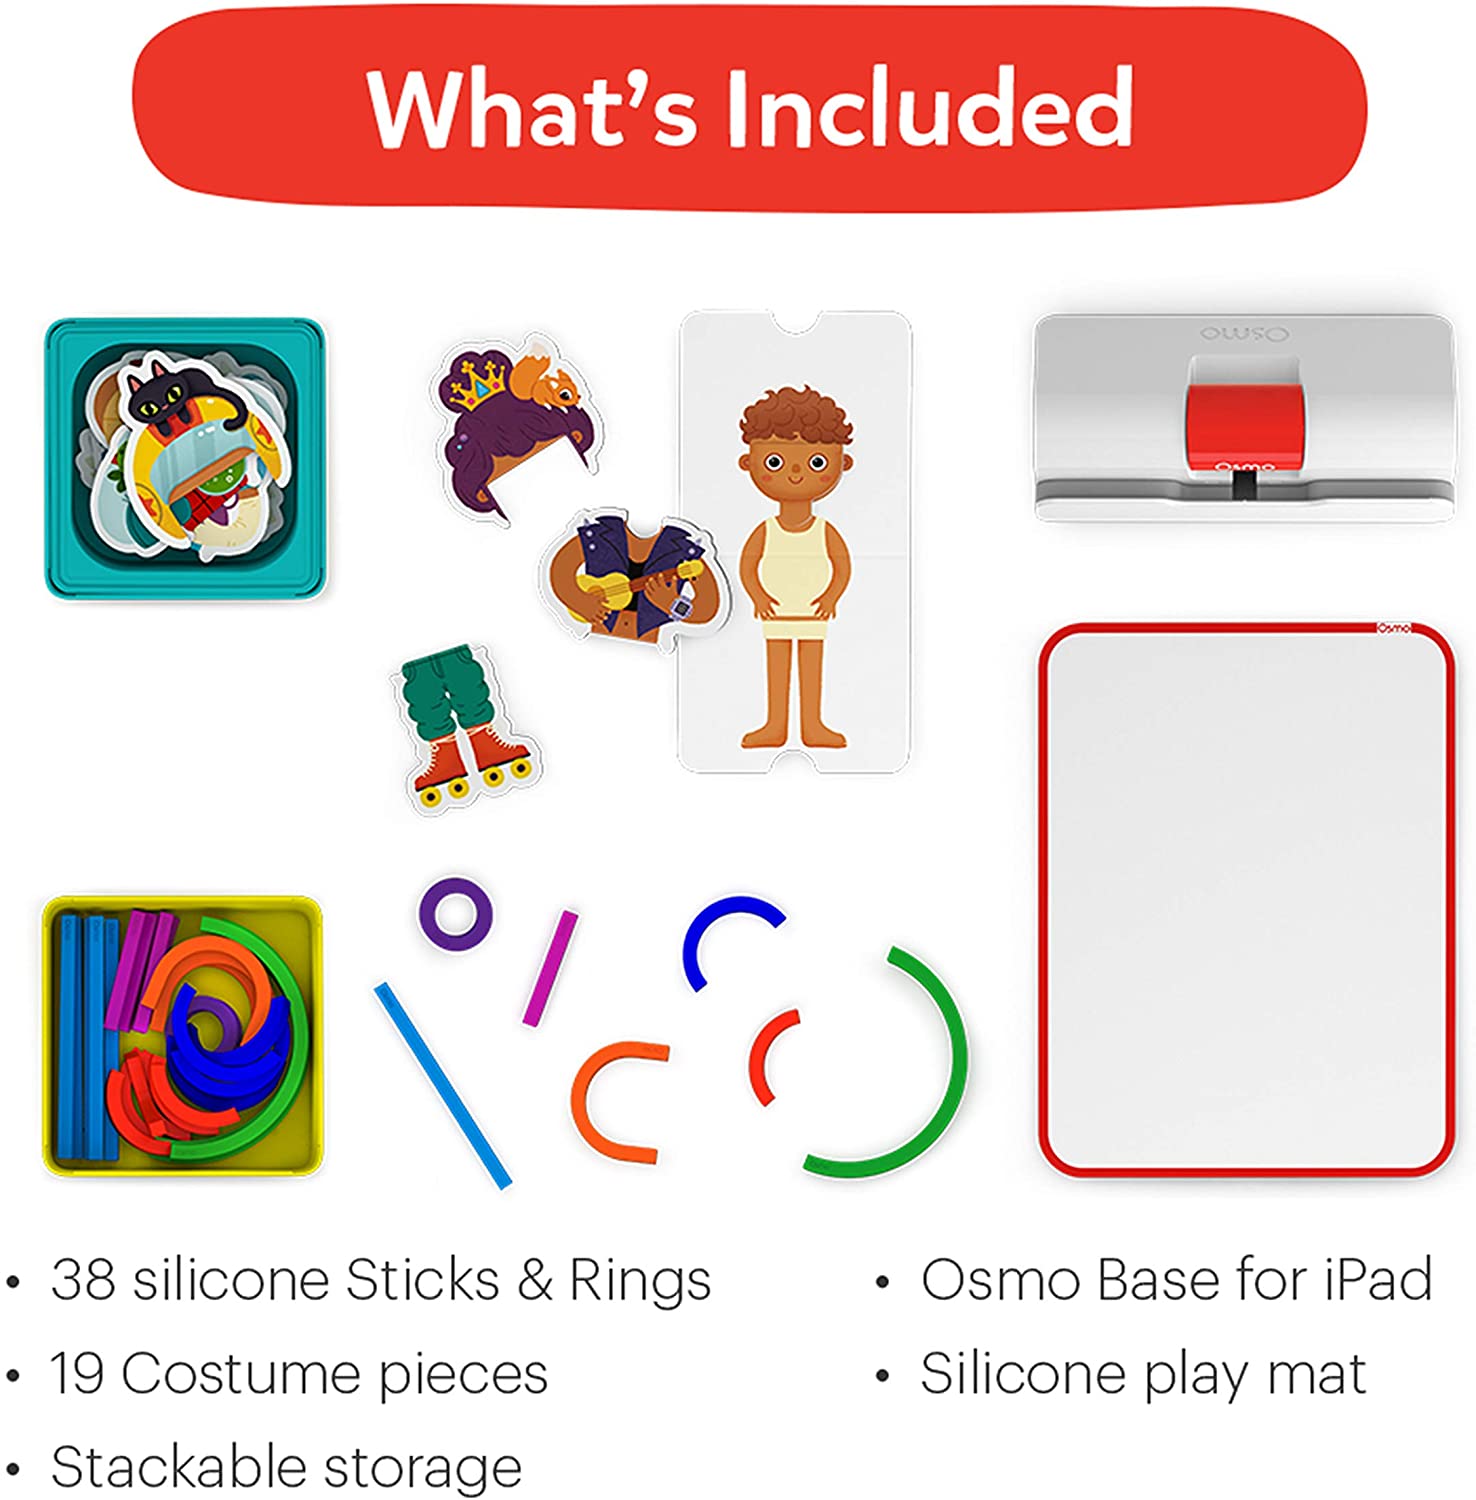 Osmo Little Genuis for iPad is a starter kit - EDGEucating